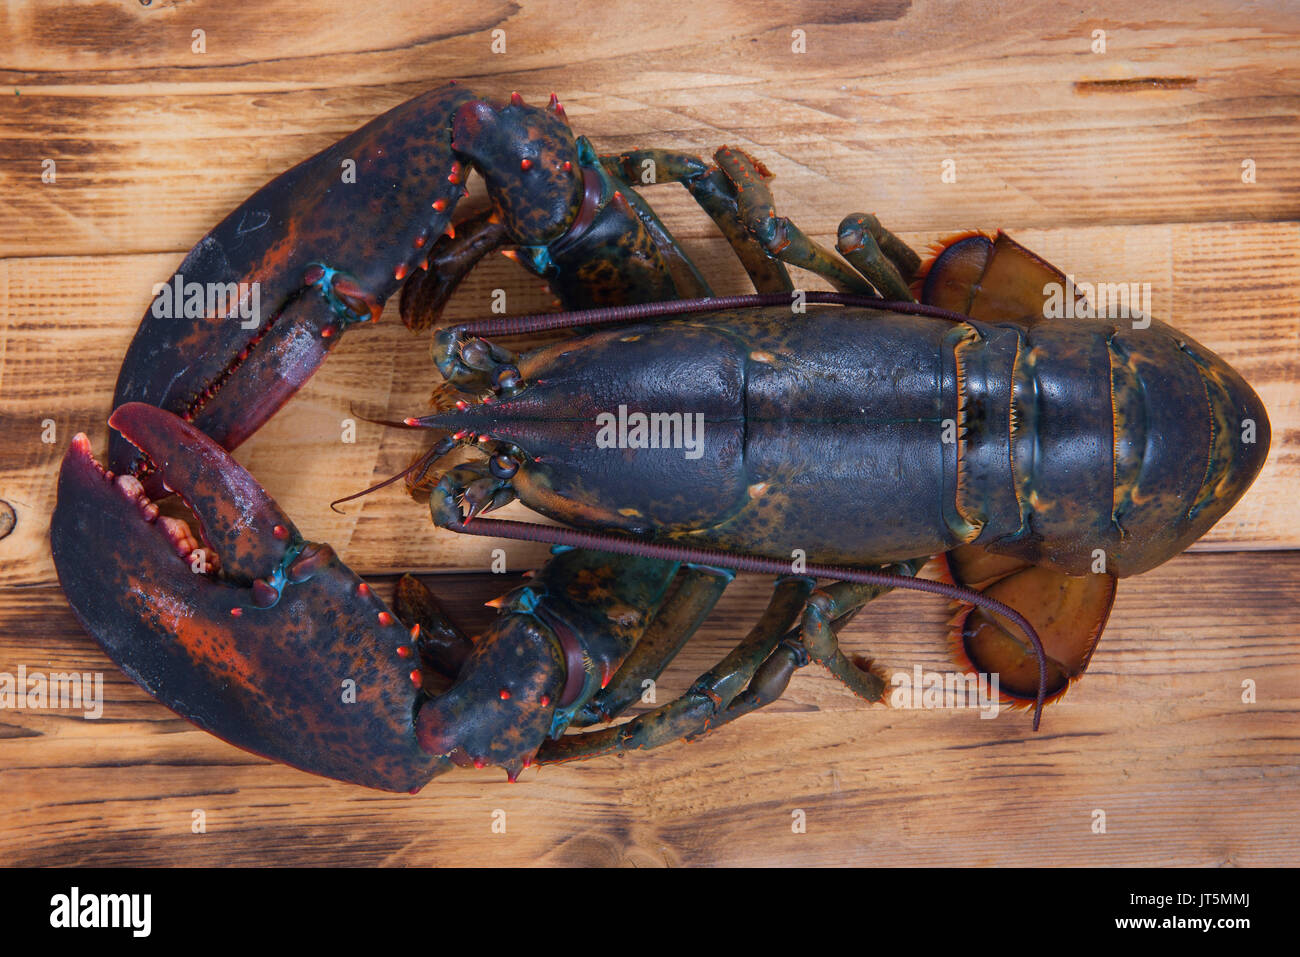 lobster from USA. Stock Photo